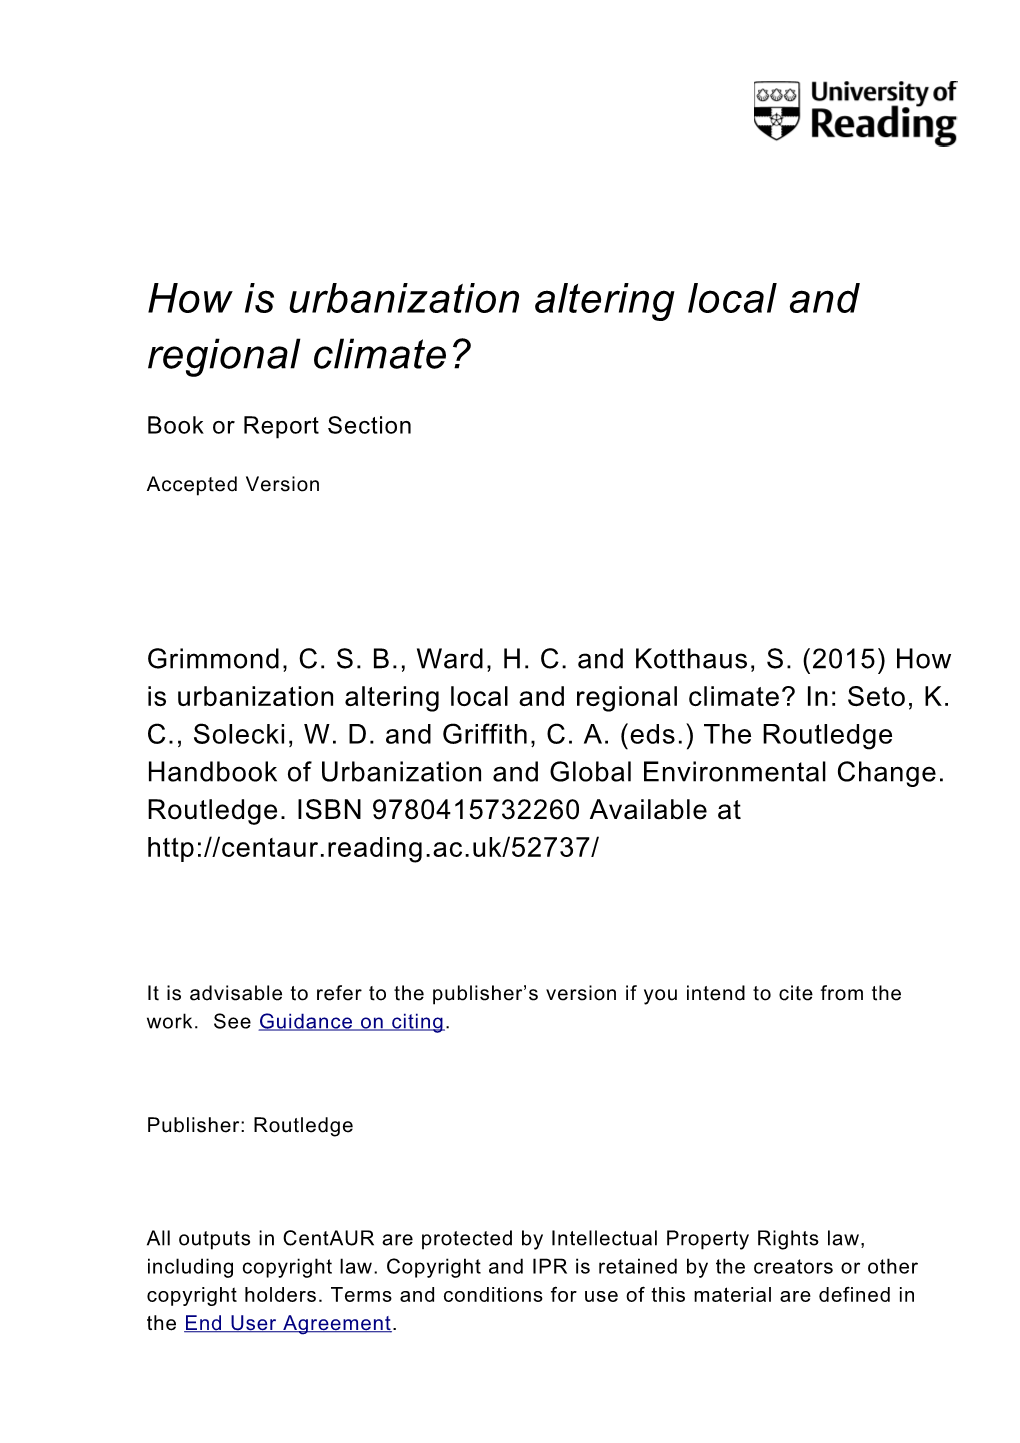 How Is Urbanization Altering Local and Regional Climate?